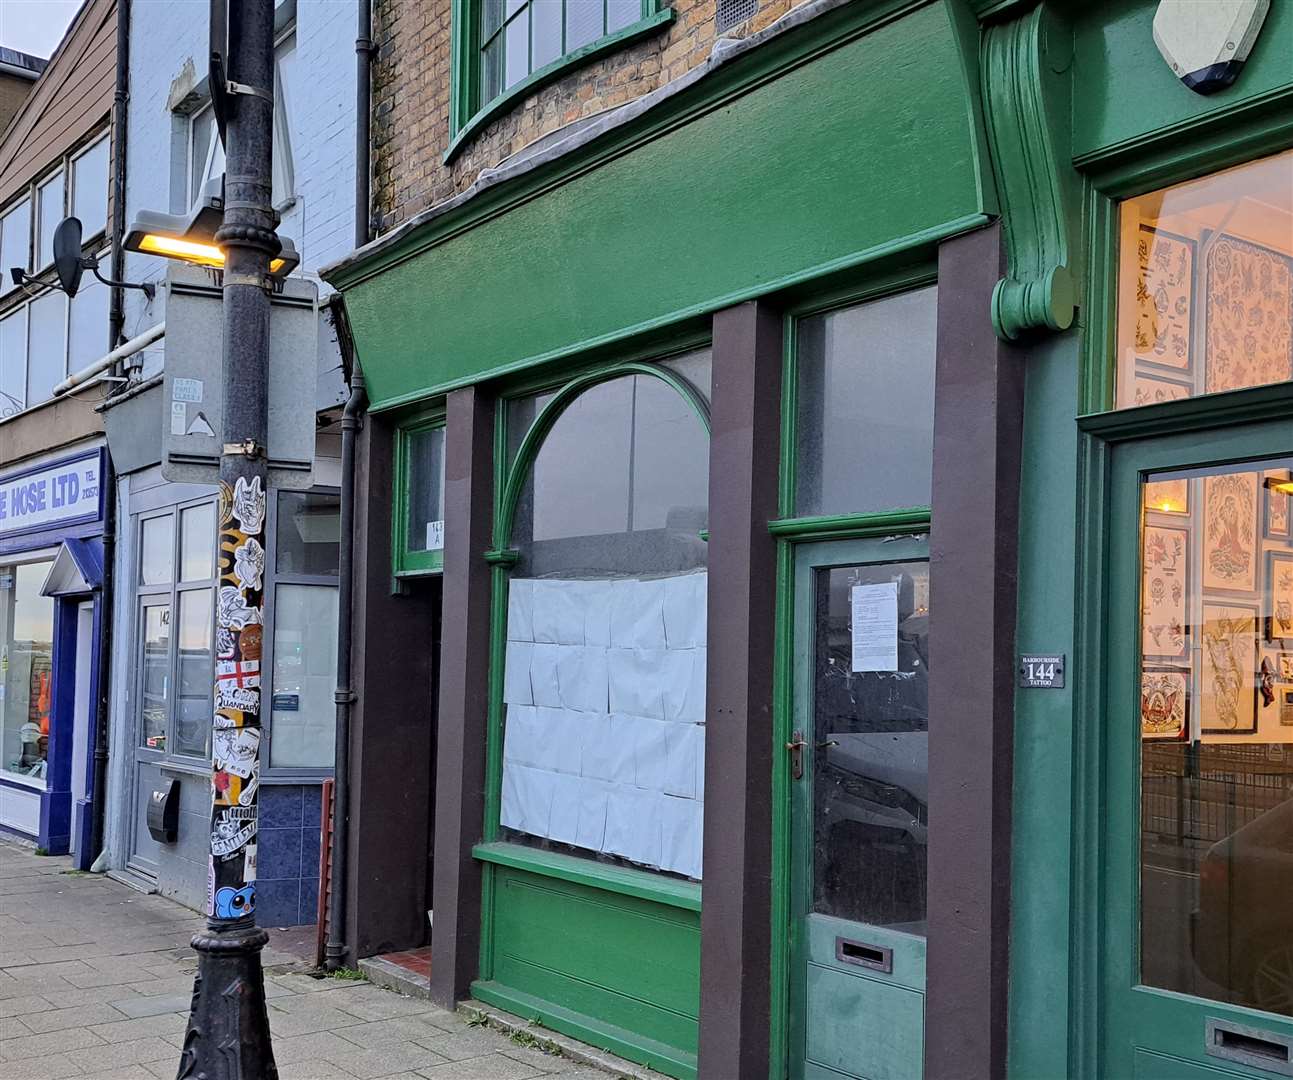 A company called Dracula Parrot Ltd wants to turn this property in Snargate Street, Dover, into a bar